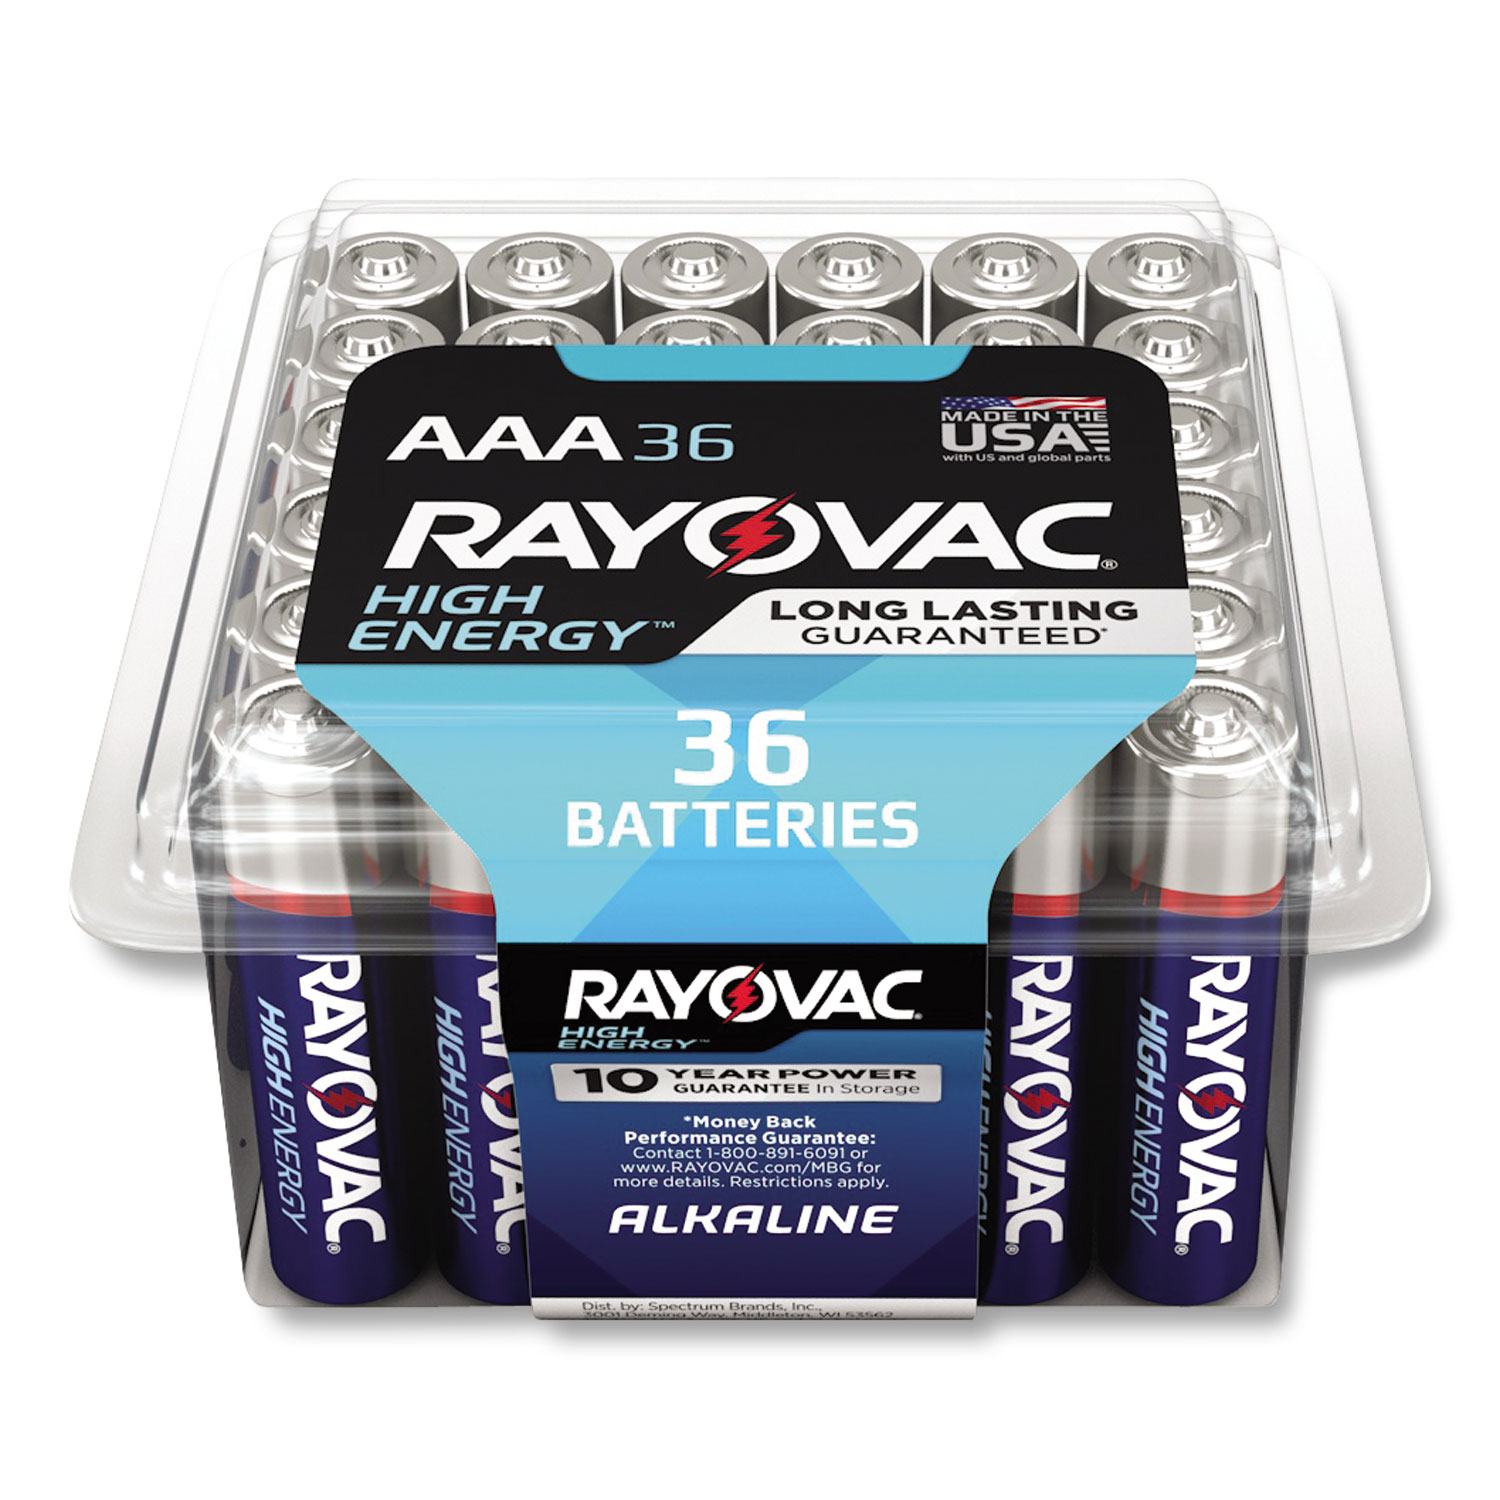  Rayovac 82436PPK Alkaline AAA Batteries, 36/Pack (RAY82436PPK) 